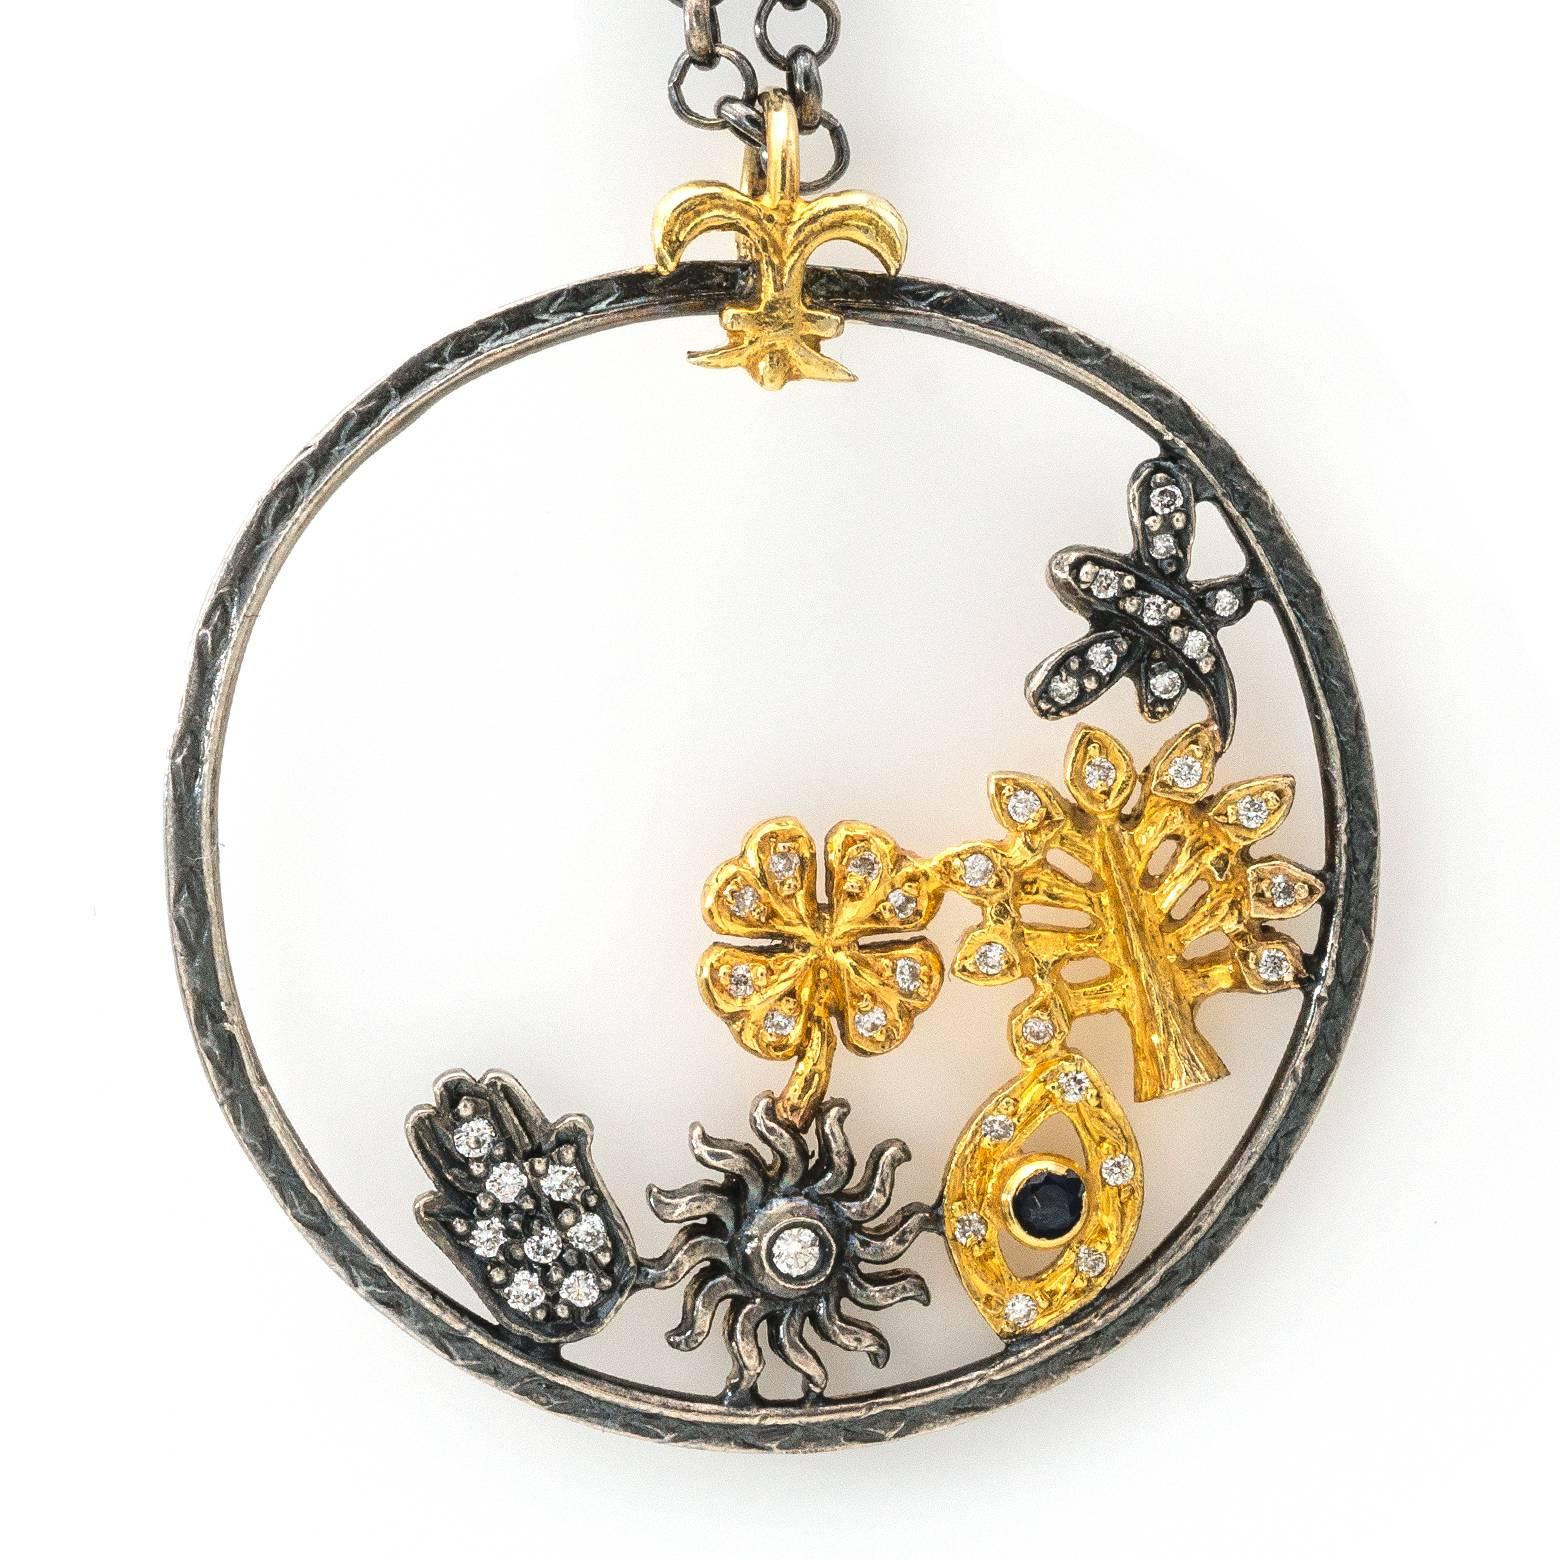 This whimsical pendant is a mixture of flora and the gold vermeil 'evil eye' with a black spinal.There is a four leaf clover in gold vermeil with diamonds and many more...suspended in a sterling silver ring oxidized. The chain is oxidized as